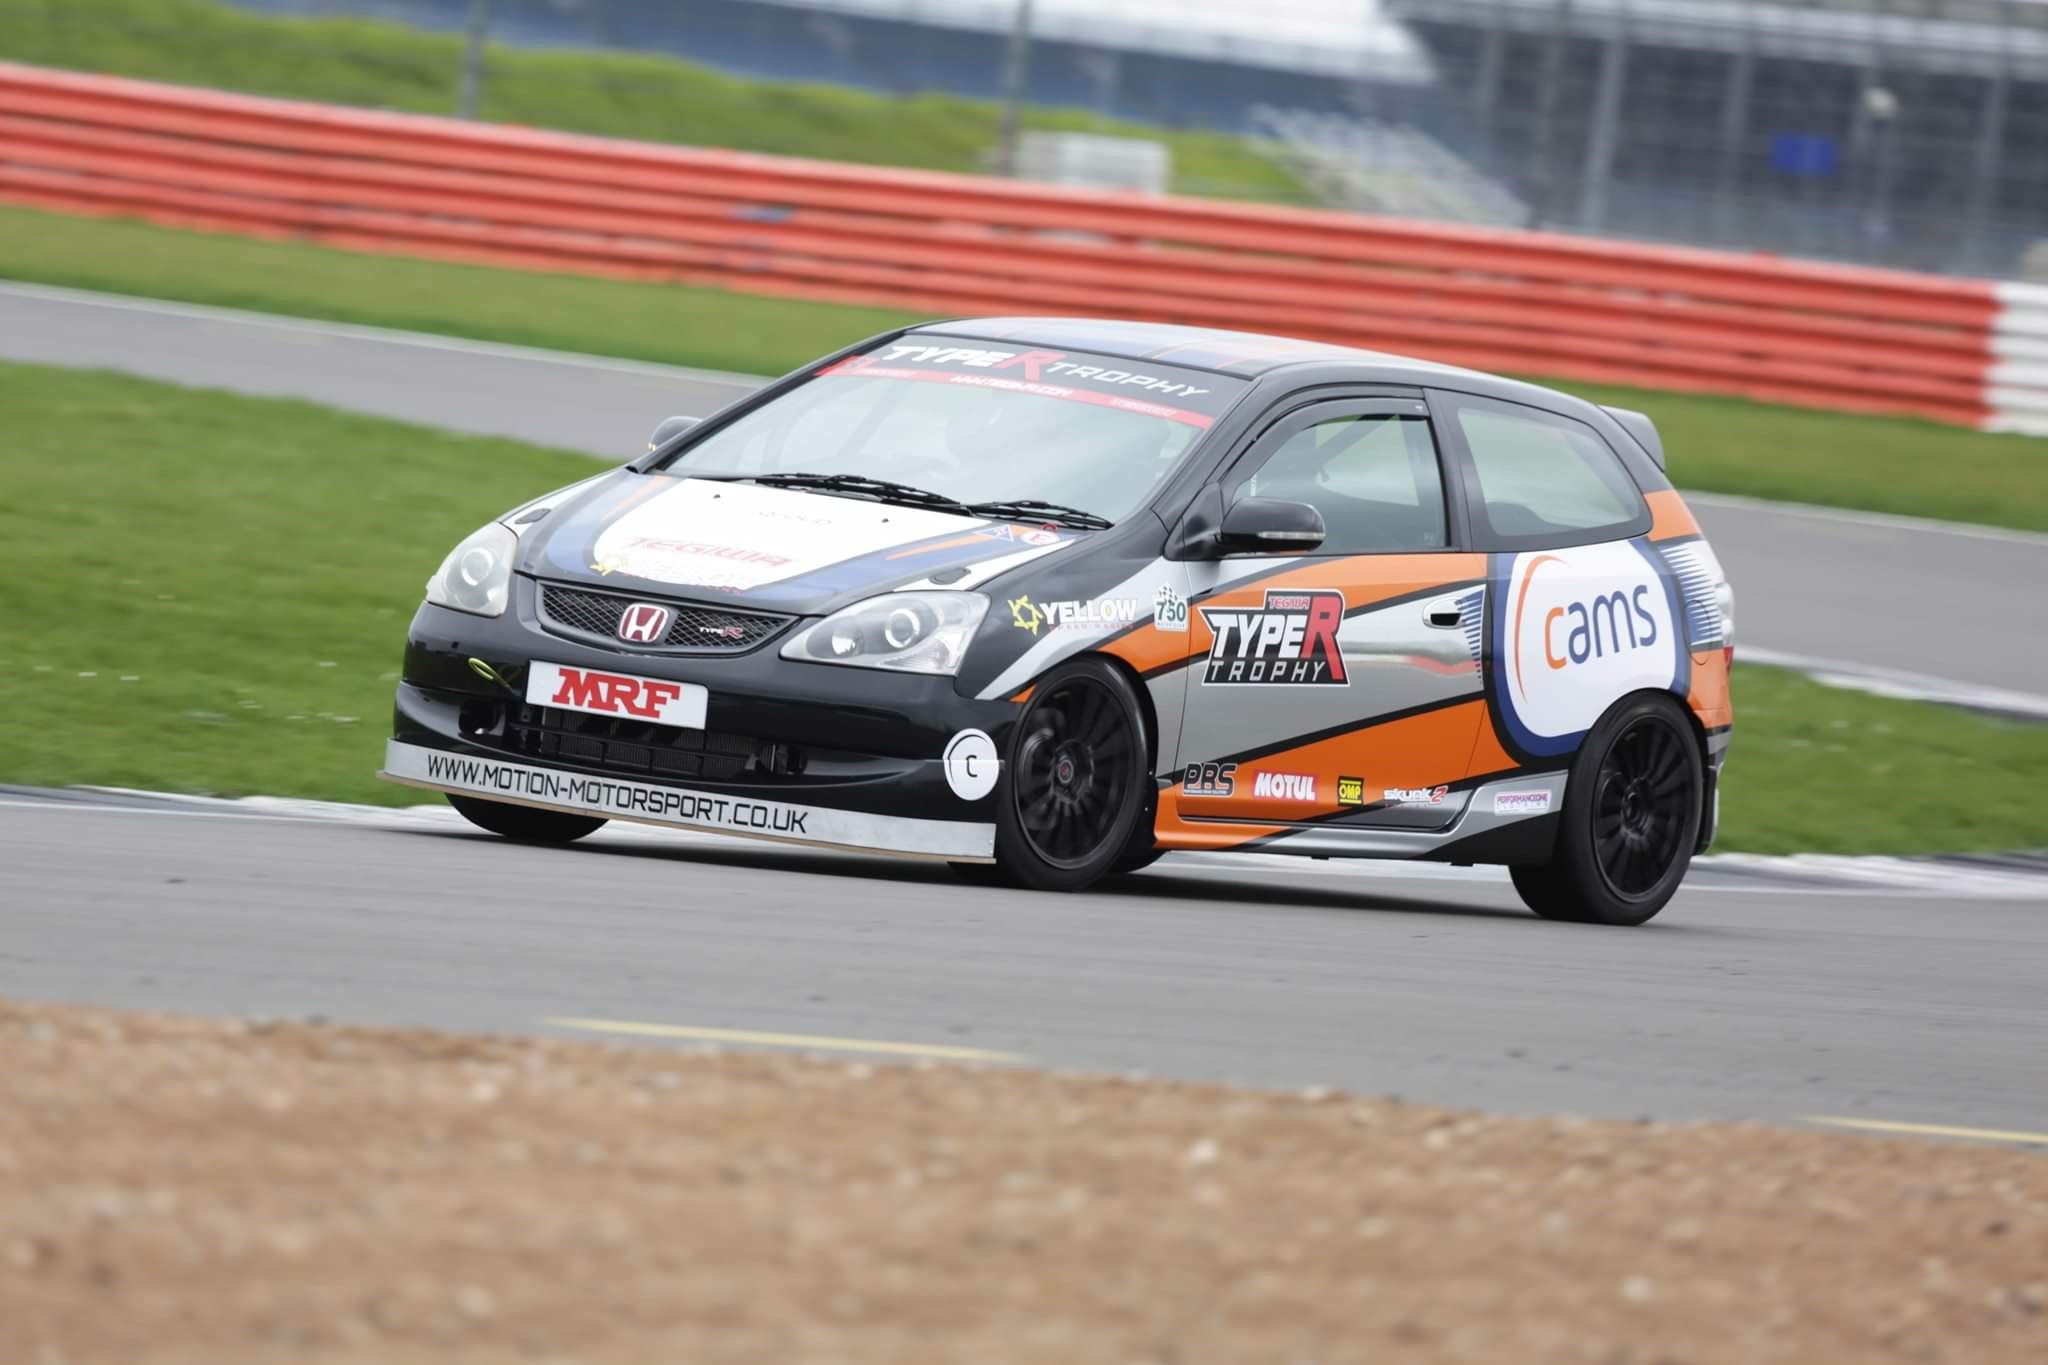 IG CloudOps' Up and Coming Driver Jack Leese in the Honda Civic Trophy